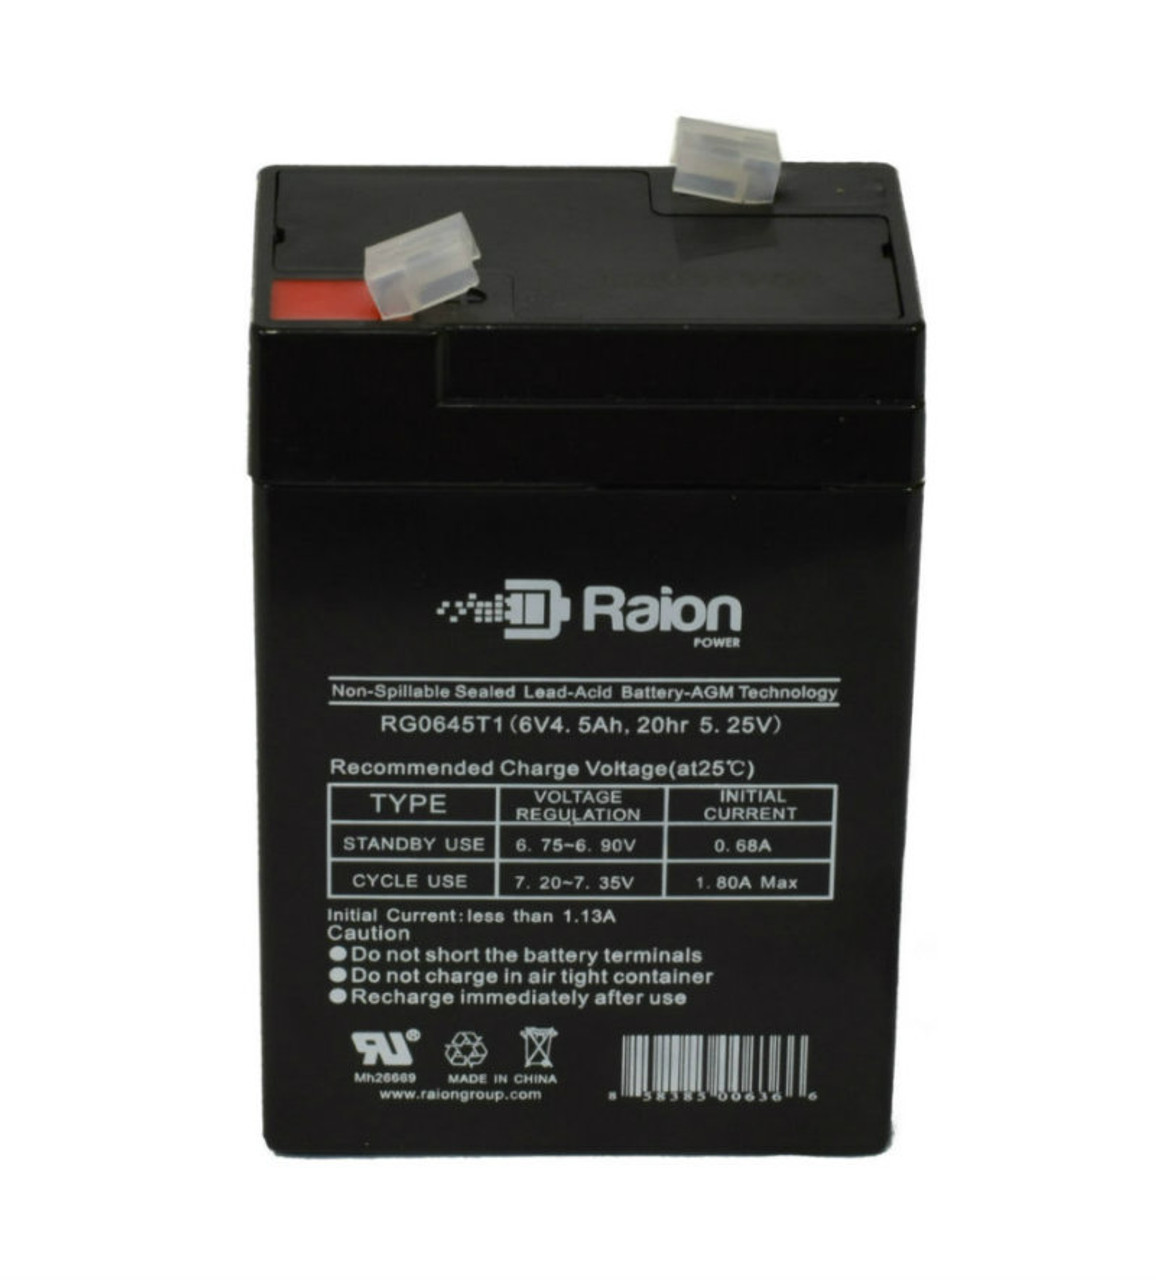 Raion Power RG0645T1 Replacement Battery Cartridge for XYC XT655